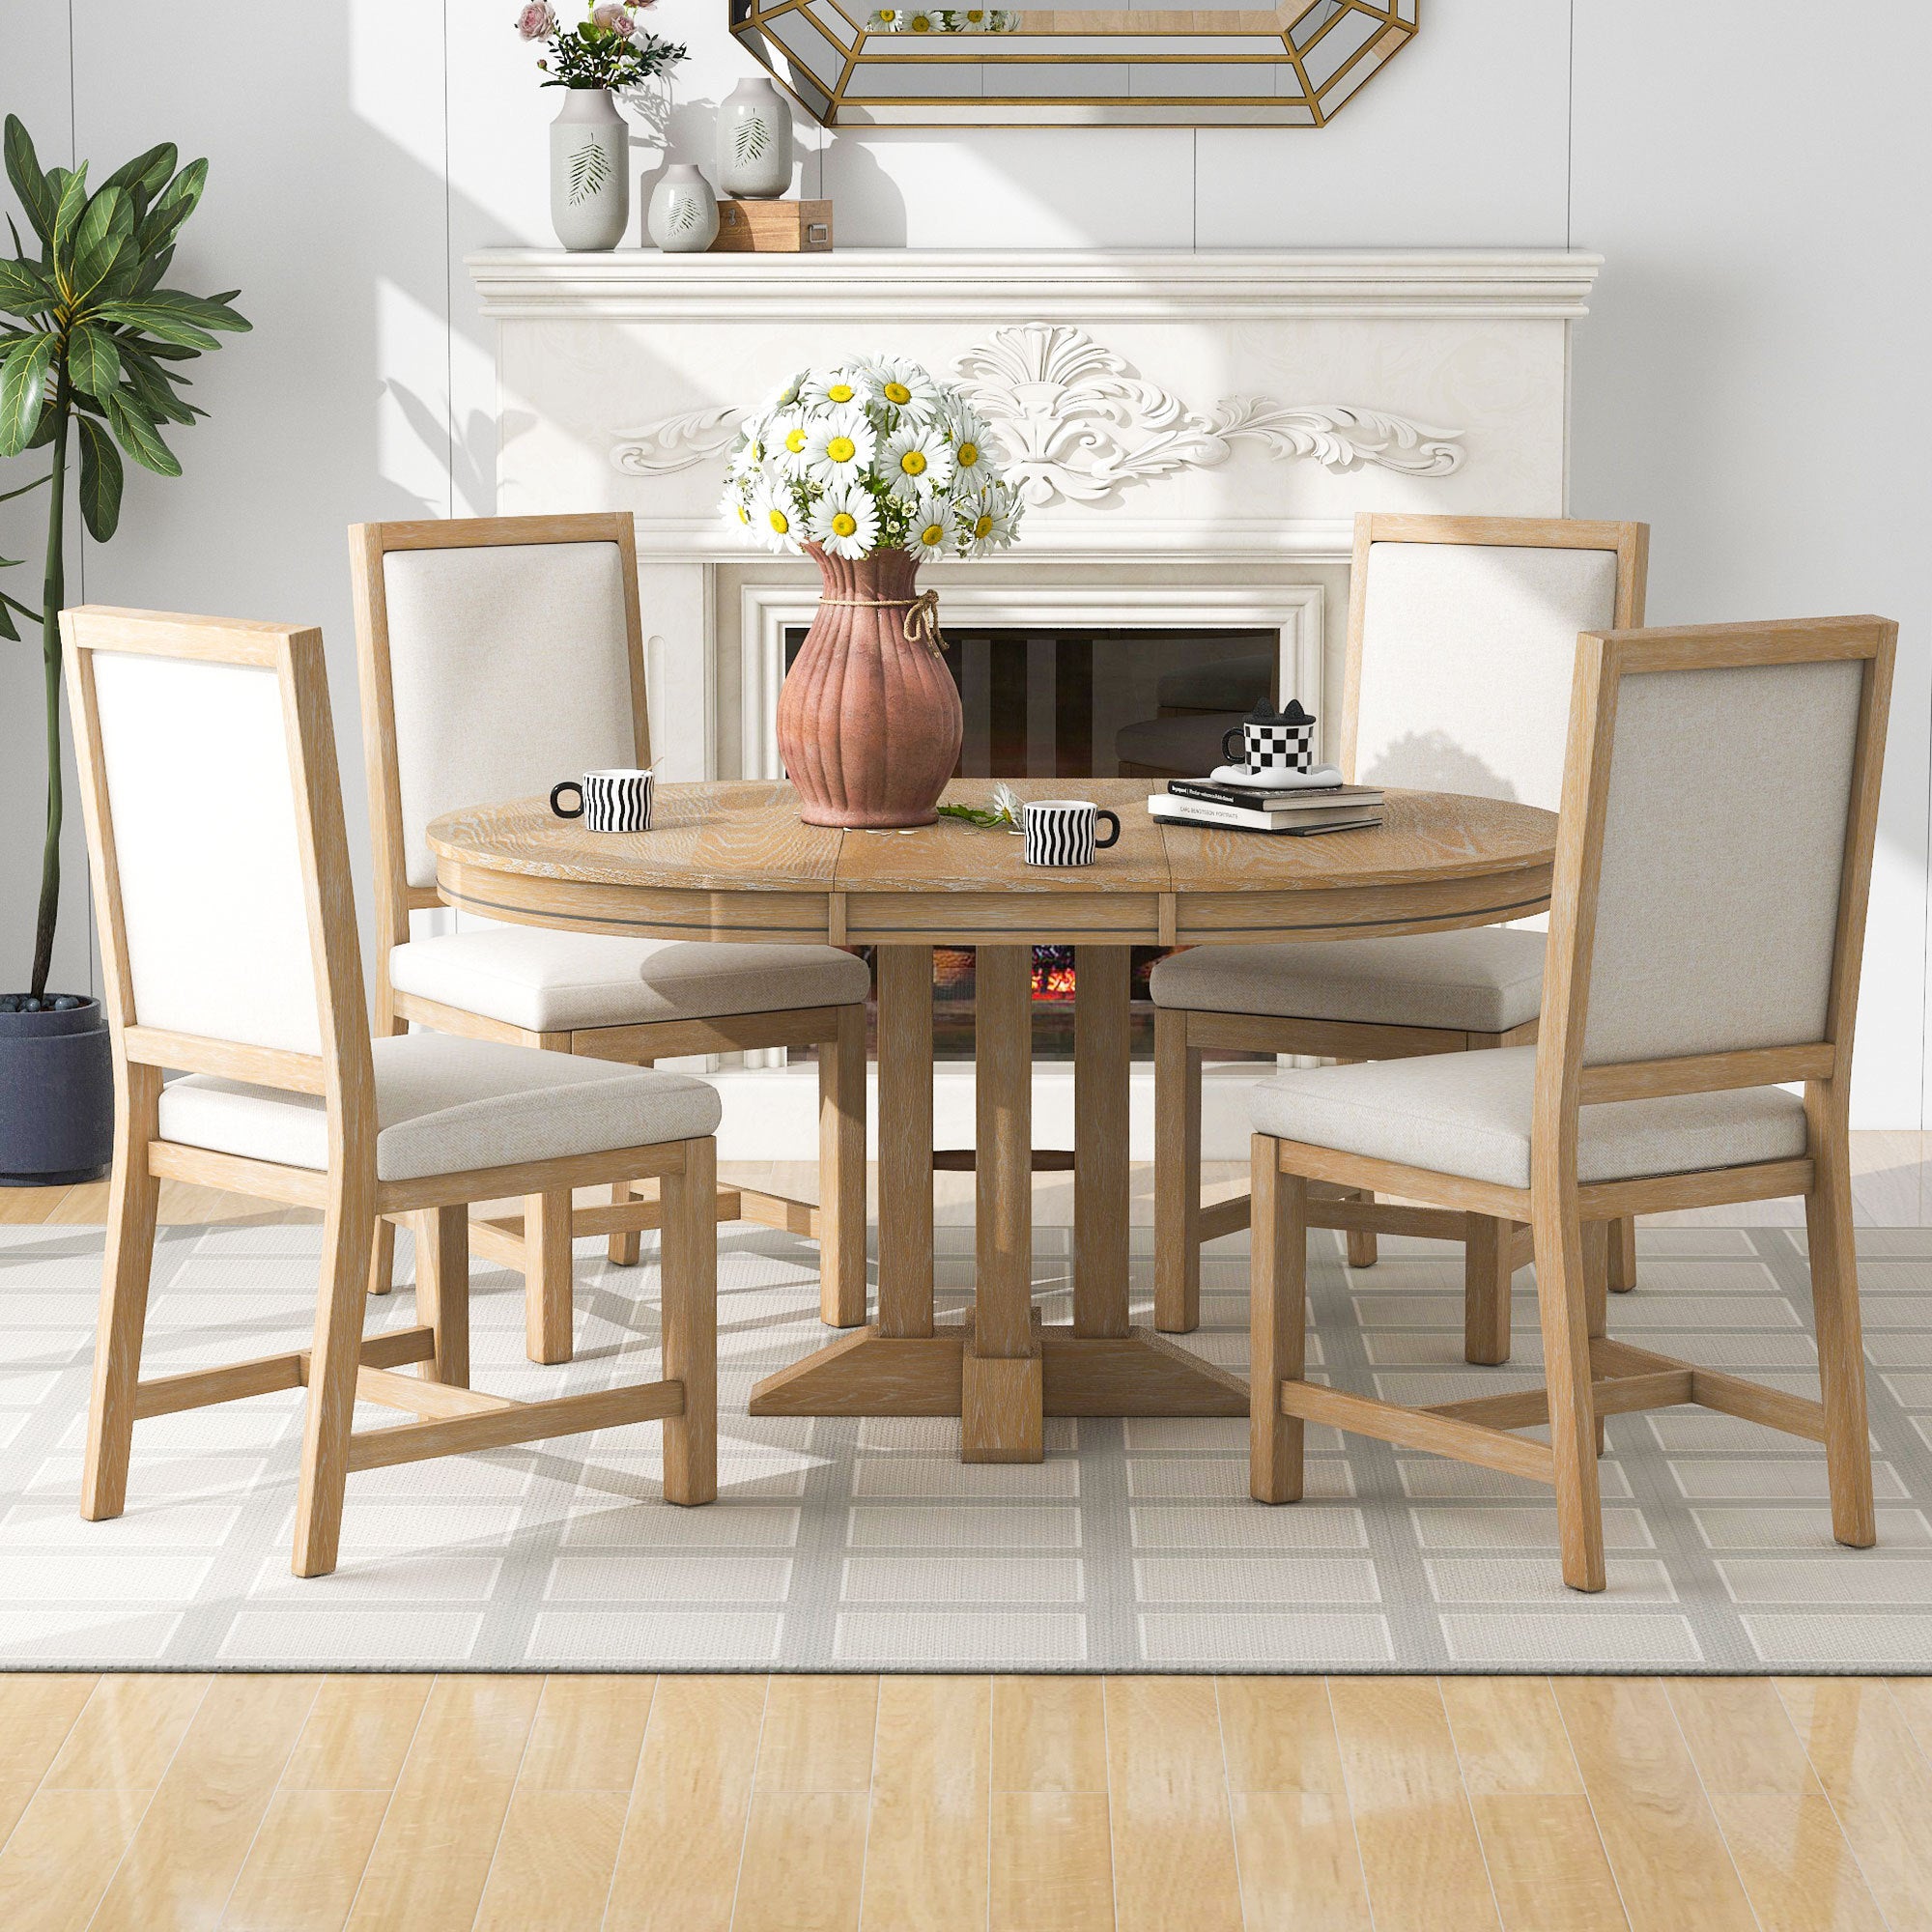 TREXM Extendable Round Table and 4 Upholstered Chairs Farmhouse 5-Piece Kitchen & Dining Furniture Set (Natural Wood Wash)